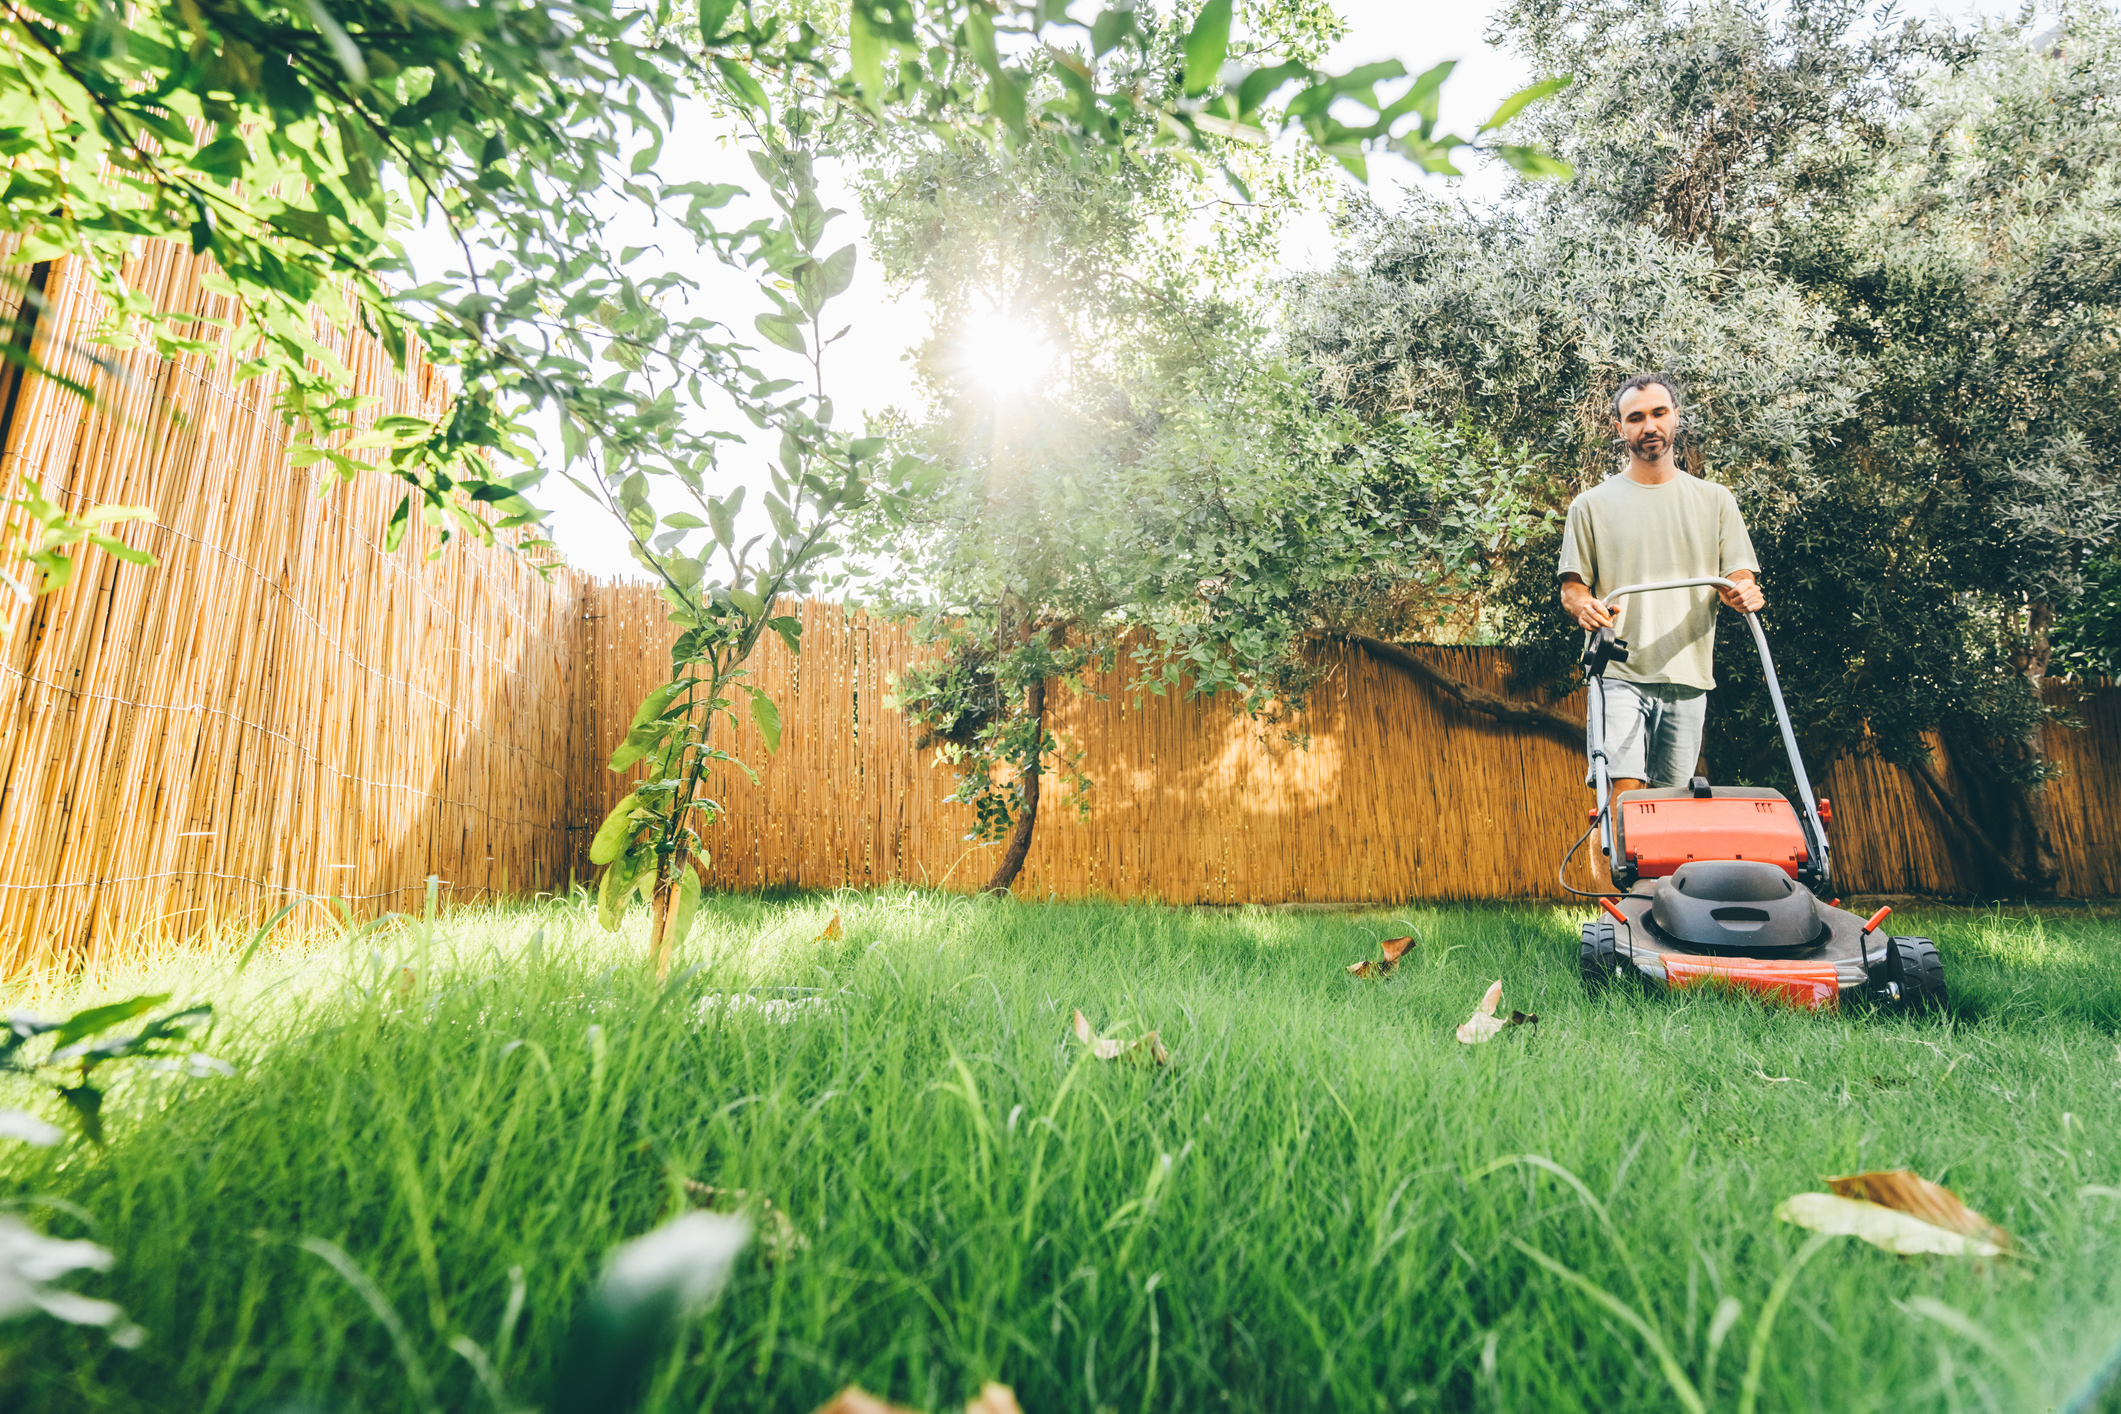 What is a Self-Propelled Lawn Mower?